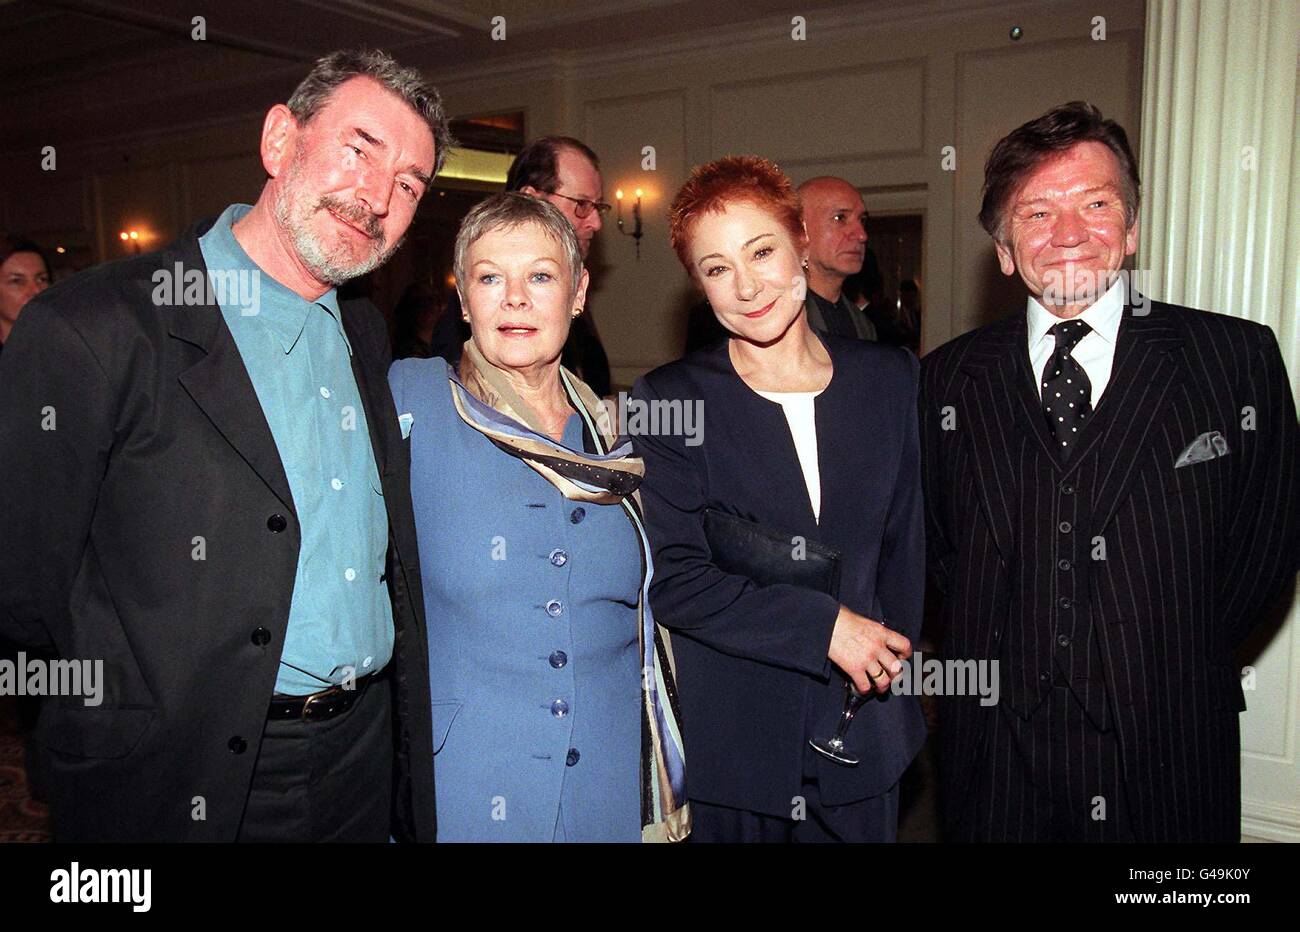 Actors and Actresses Gawn Grainger (left) and wife Zoe Wanamaker (2nd right) with Dame Judi Dench and husband Micael Williams, at today's (Friday) Evening Standards Drama Awards. Dame Judi was awarded the Patricia Rothermere Award for outstanding service. Photo by Fiona Hanson. Stock Photo